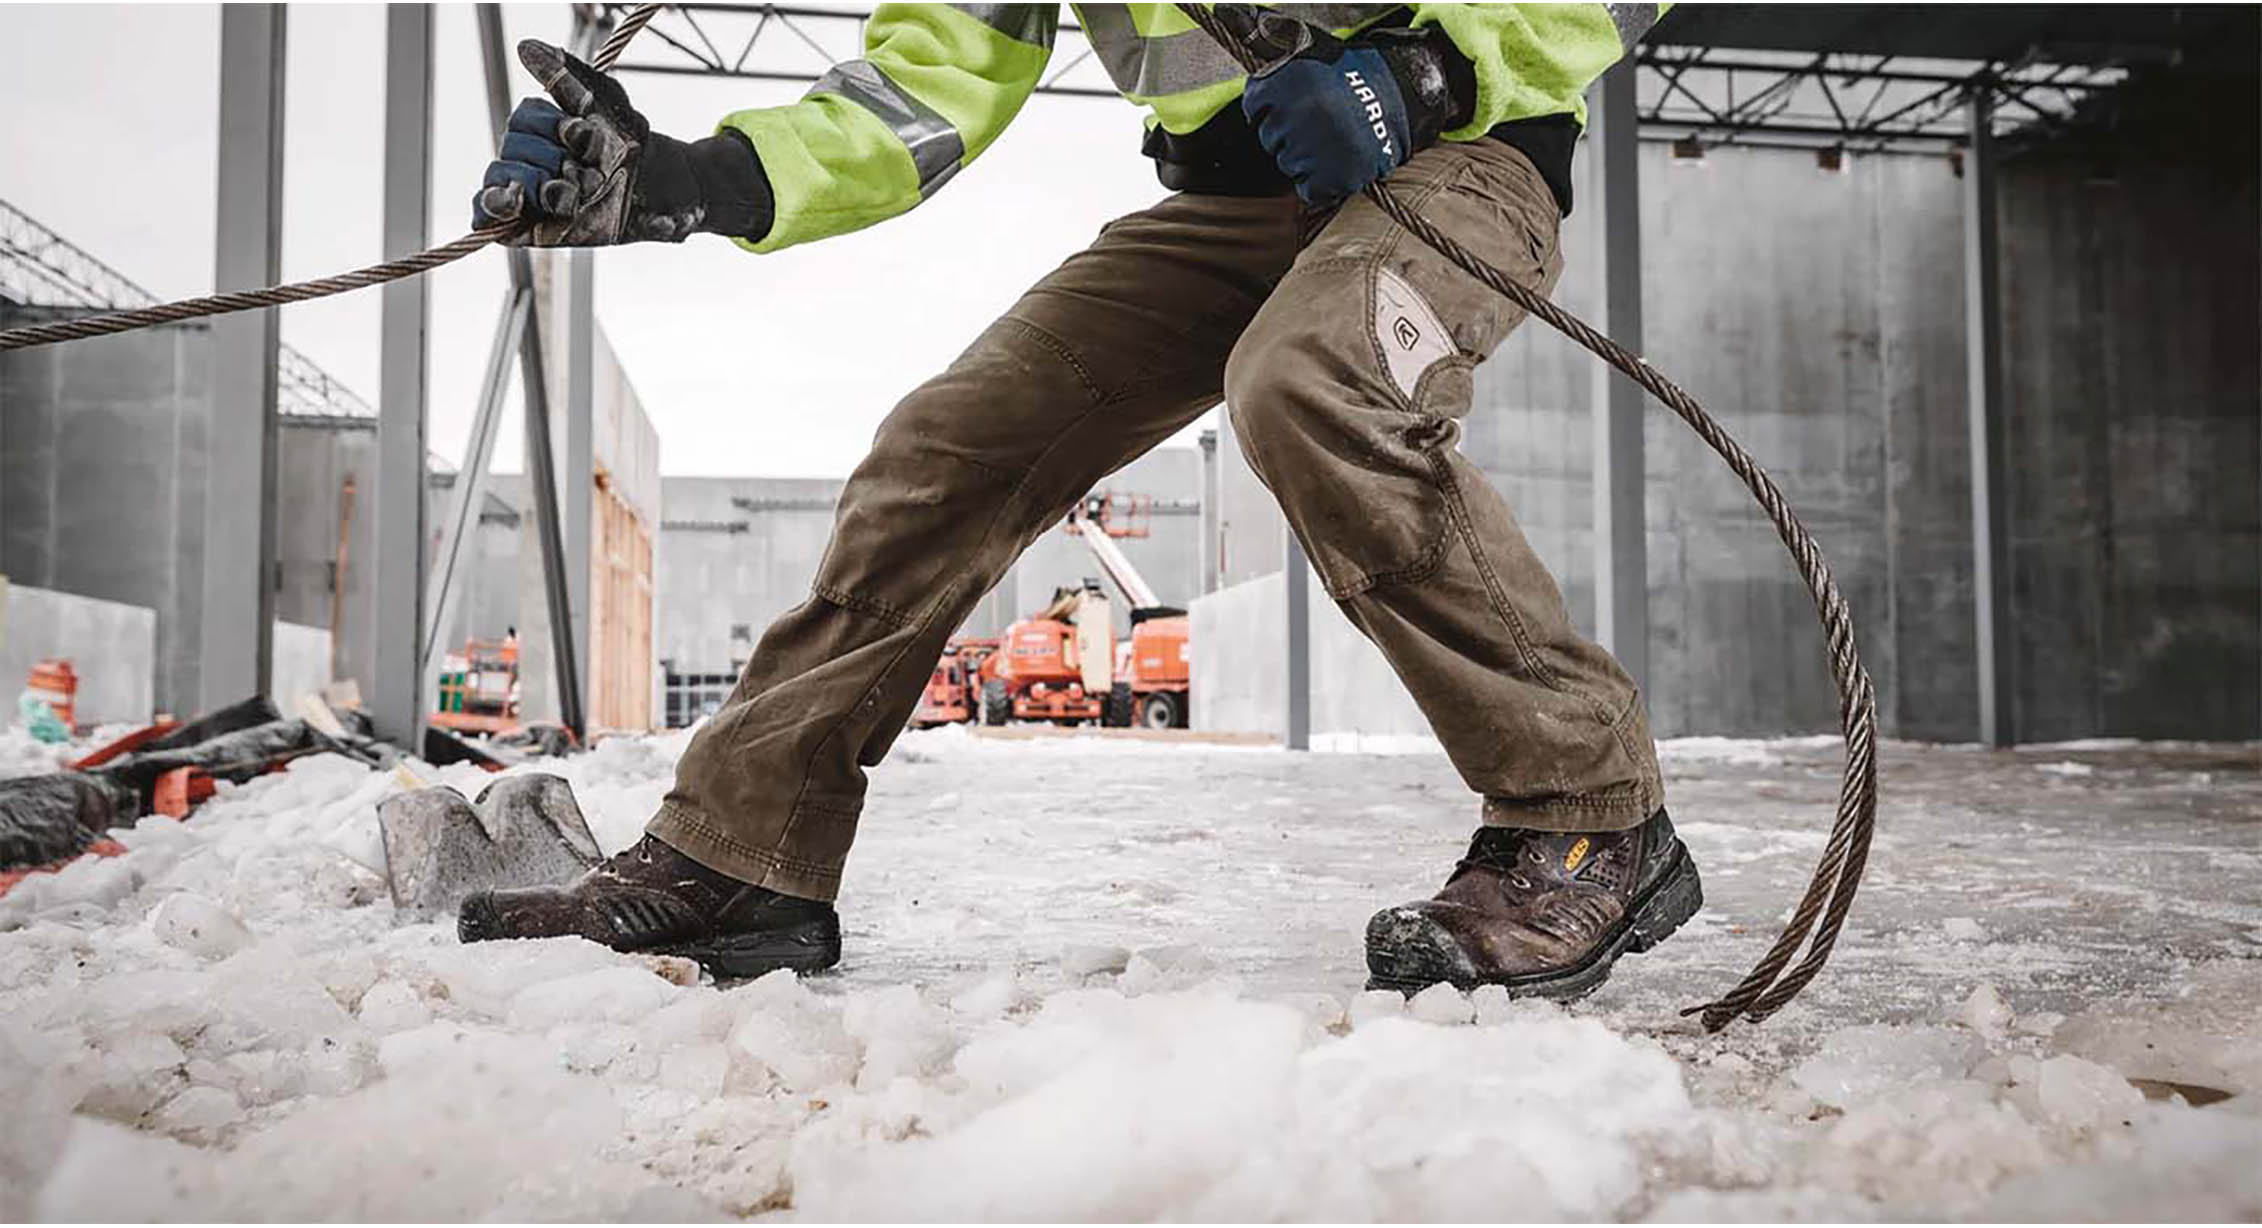 A man working on an icy construction site